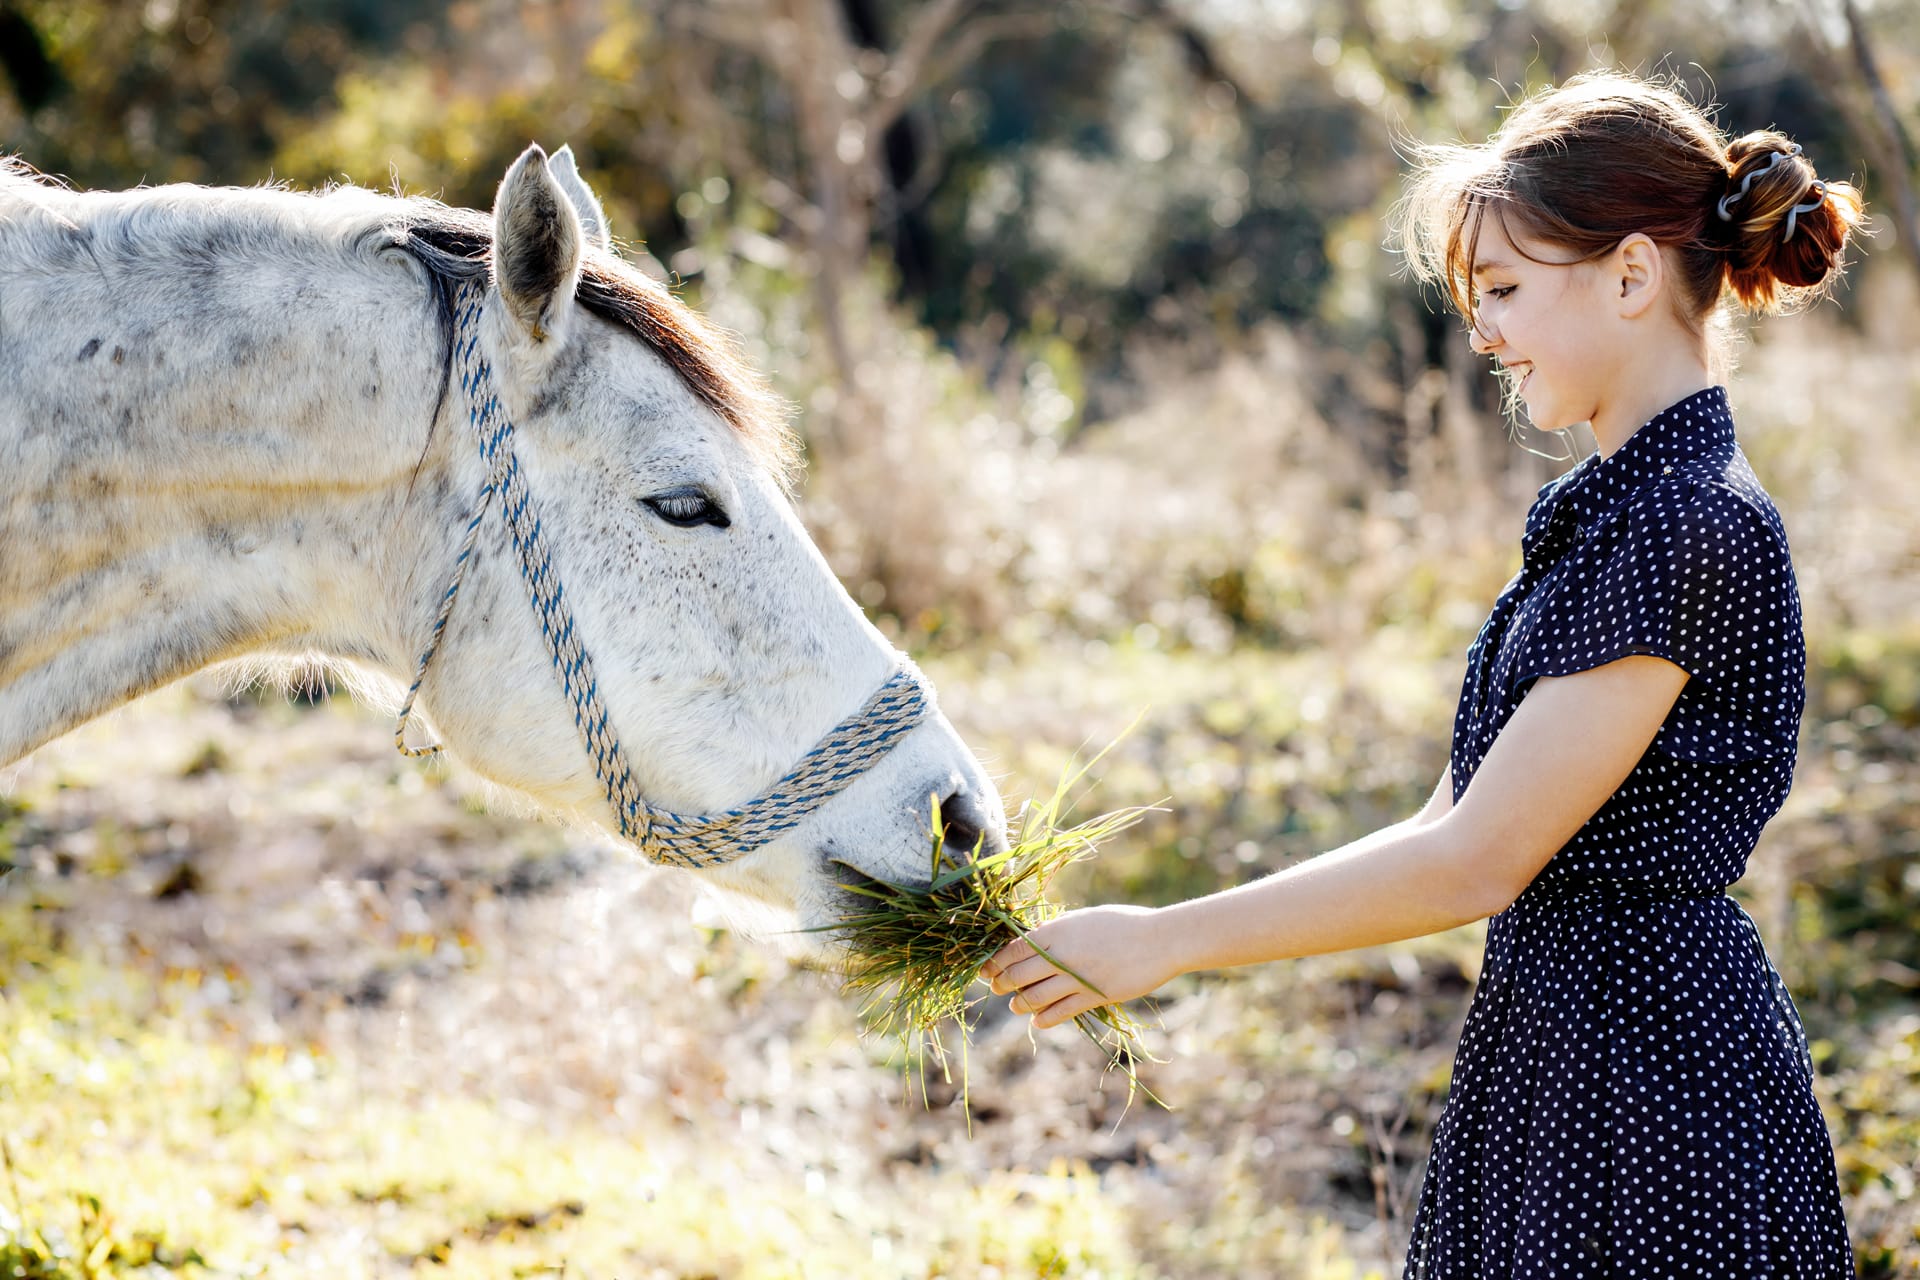 With peas feeds horse with bouquet grass trust care animals